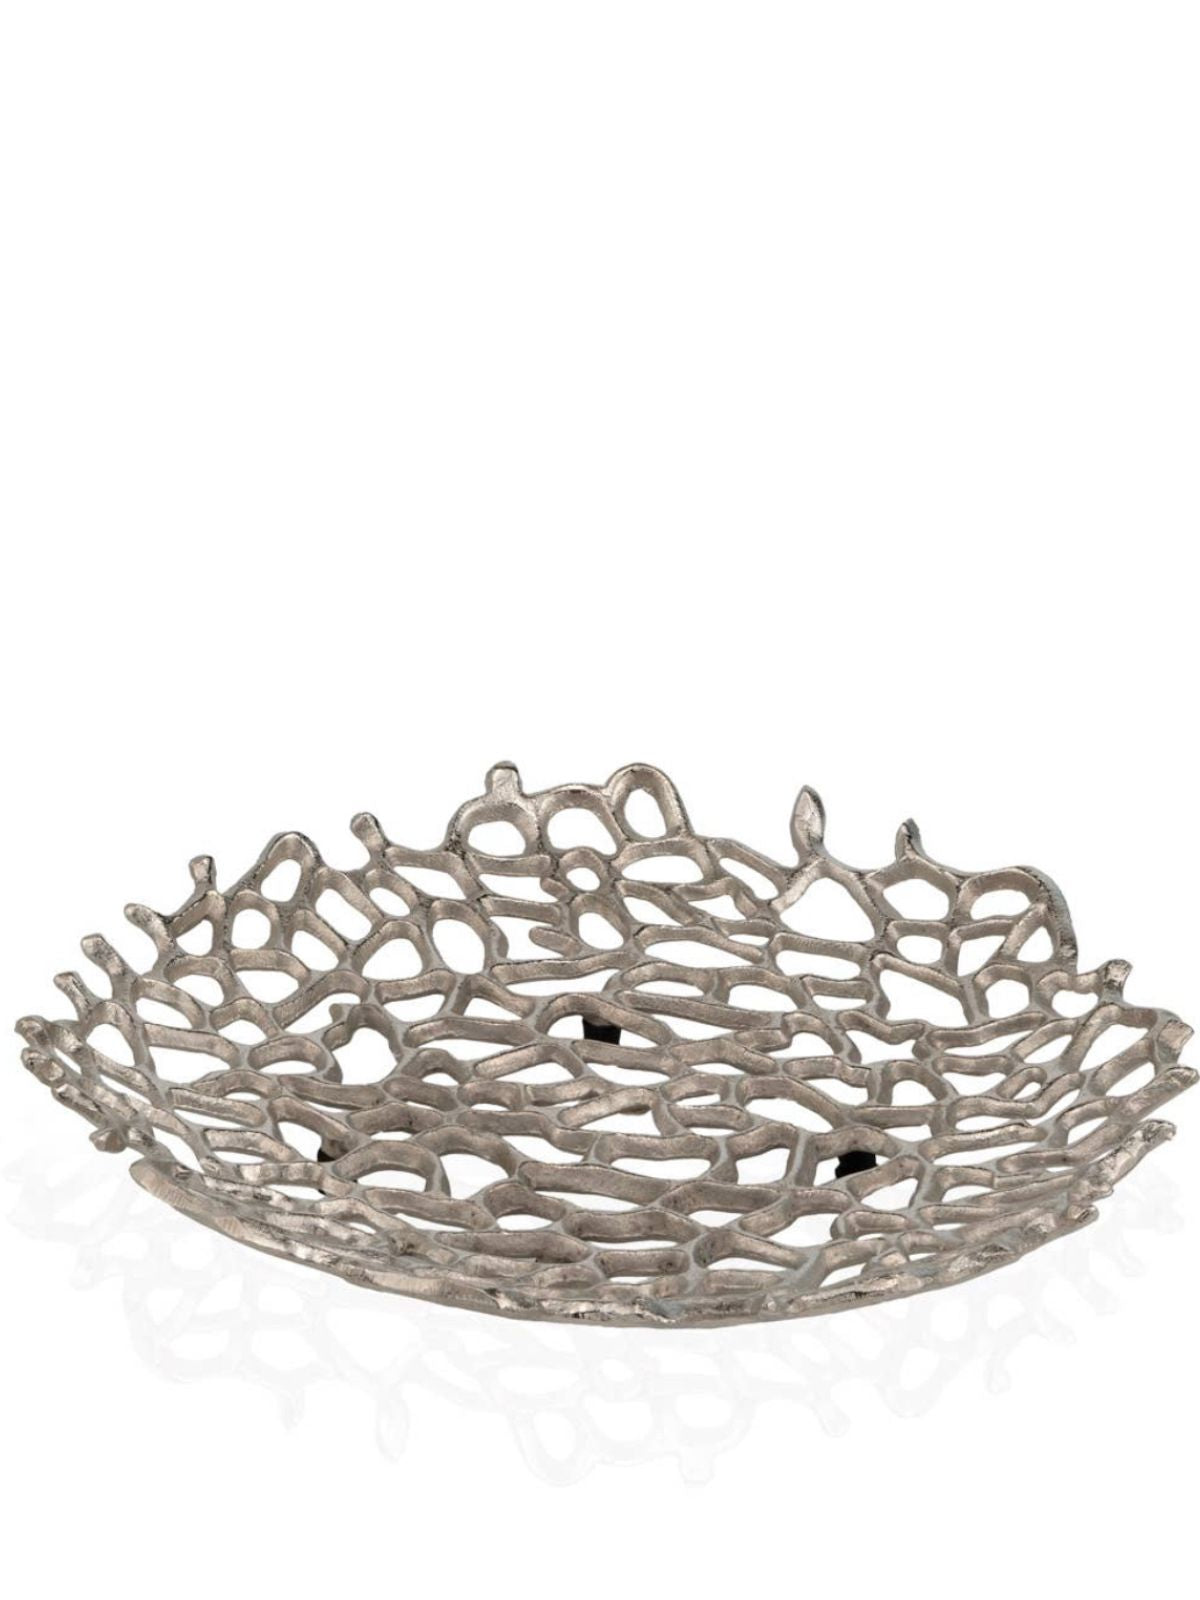 The Corallo Round Coral Plate is an enticing Accessory. Made of Cast Aluminum in an Open Connected Coral Design. Finished in Matte Silver this Plate is a great addition to Modern and Transitional Decor.